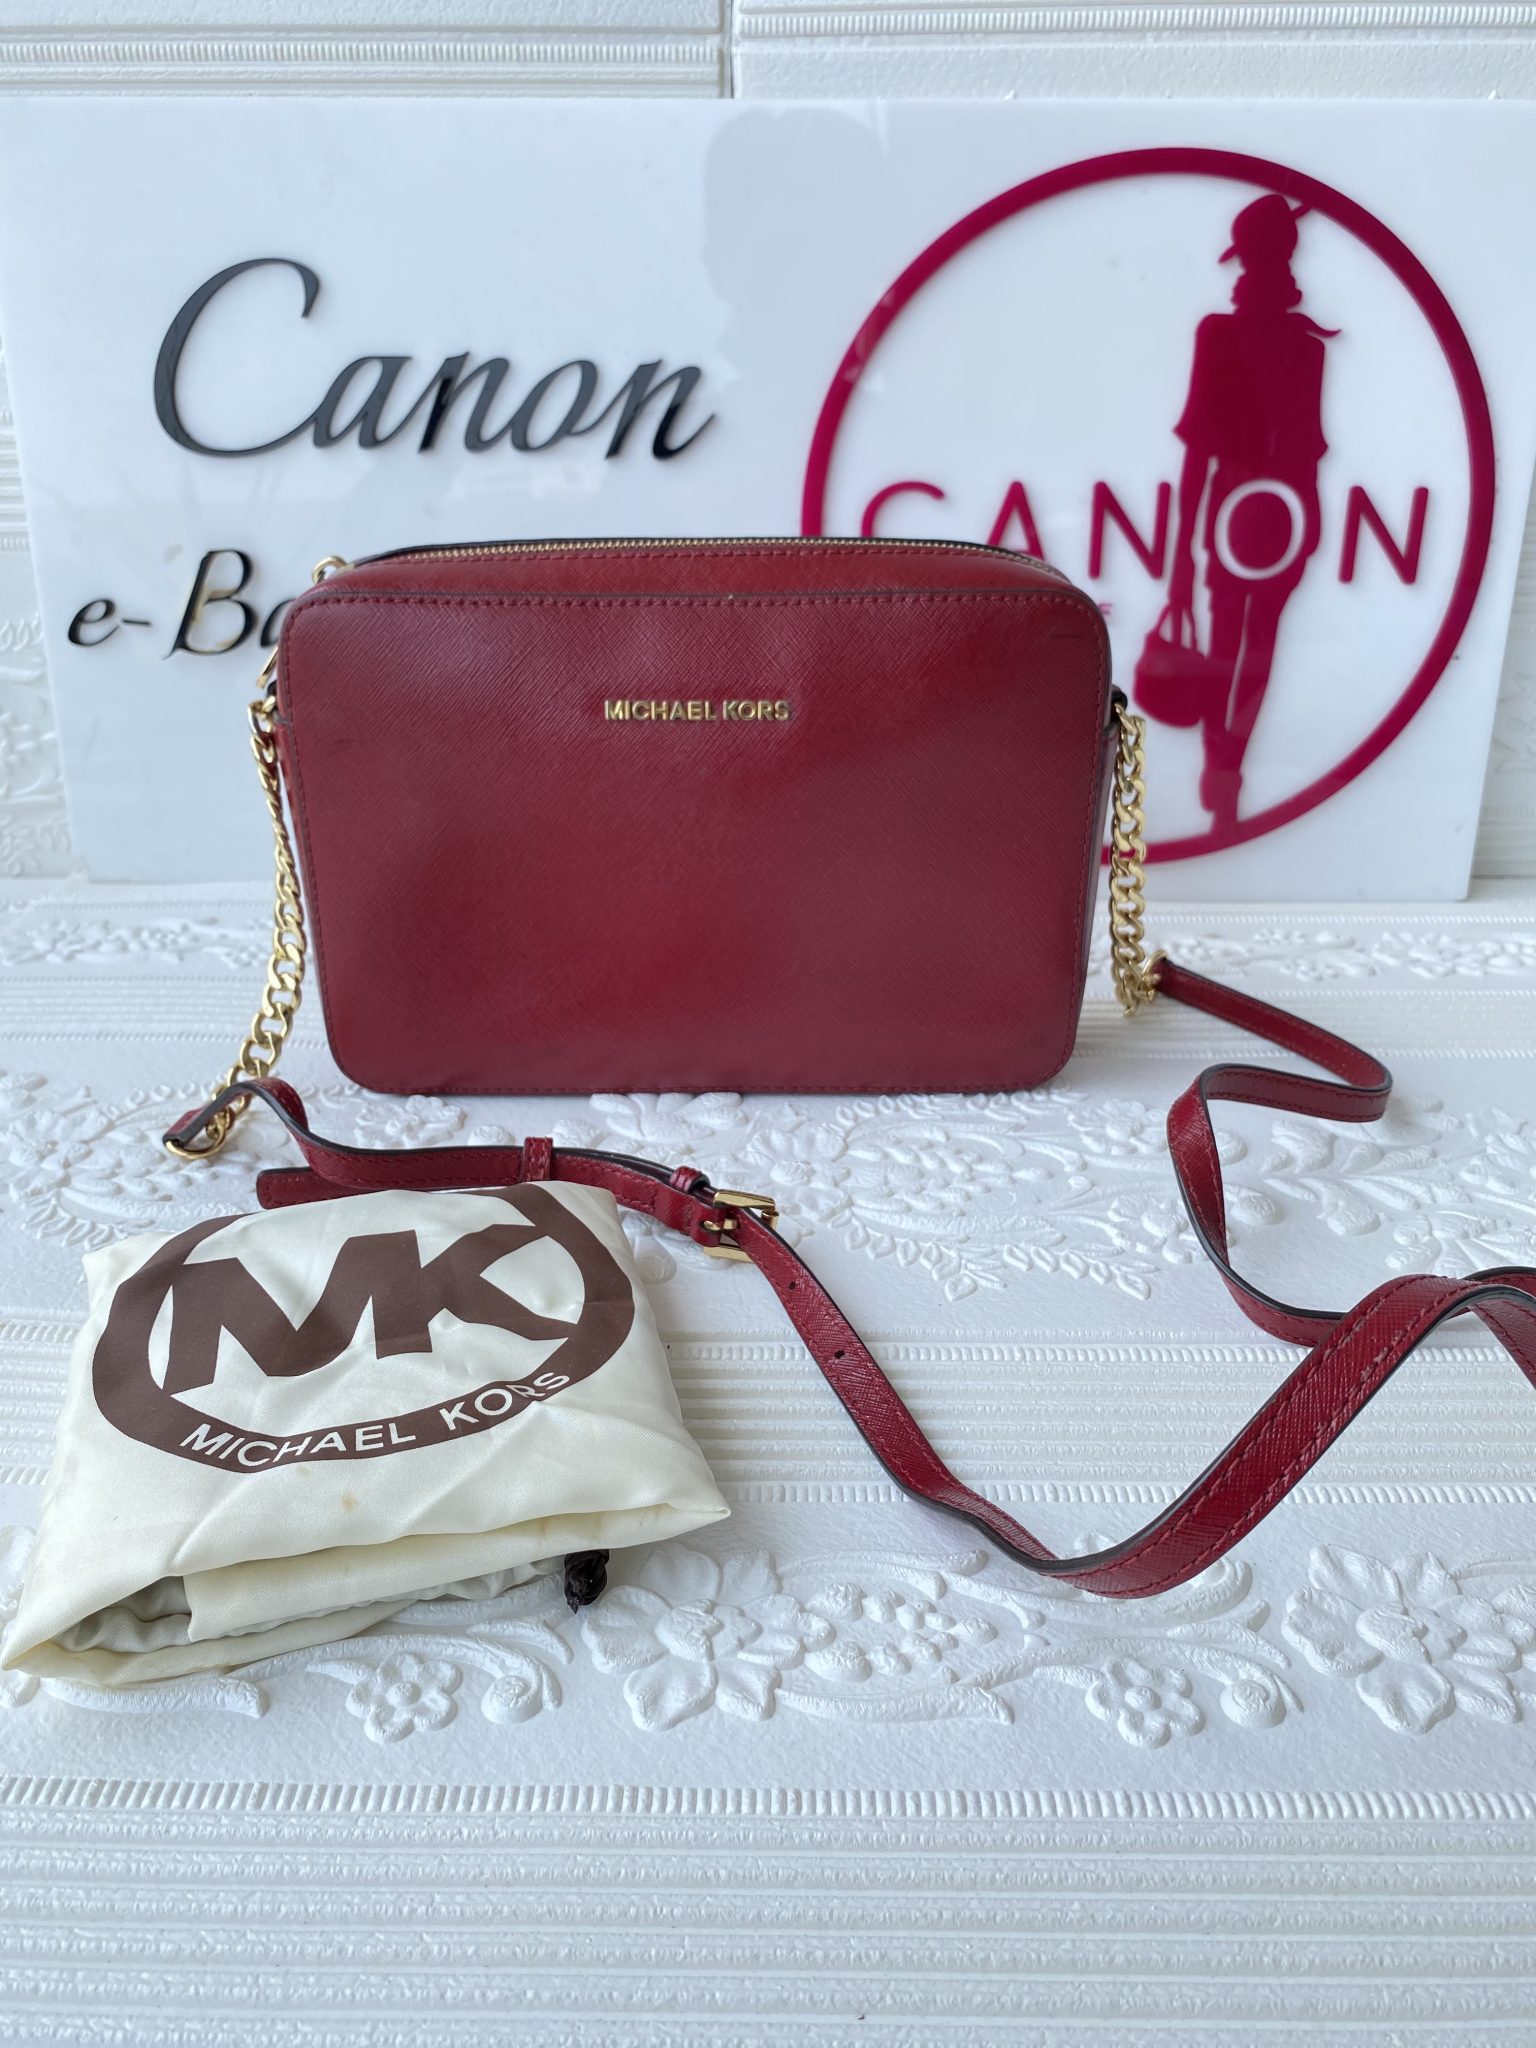 Beautiful Michael Kors #Red leather cross body bag with gold chain - Vinted